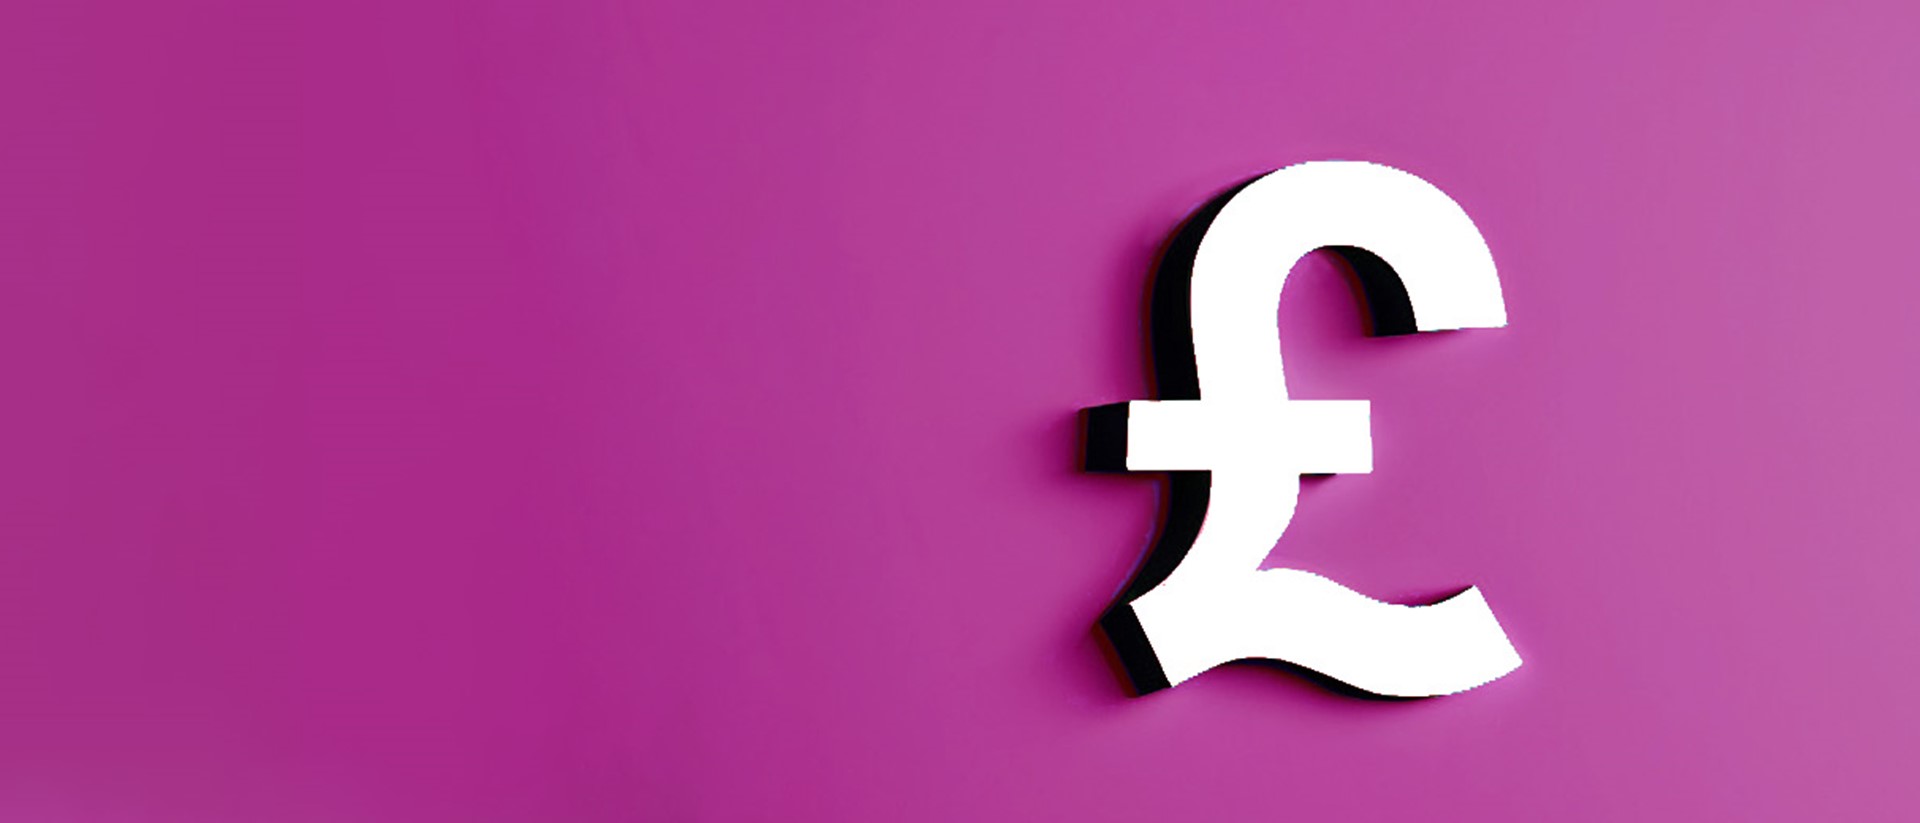 A white sterling pound symbol against a purple background